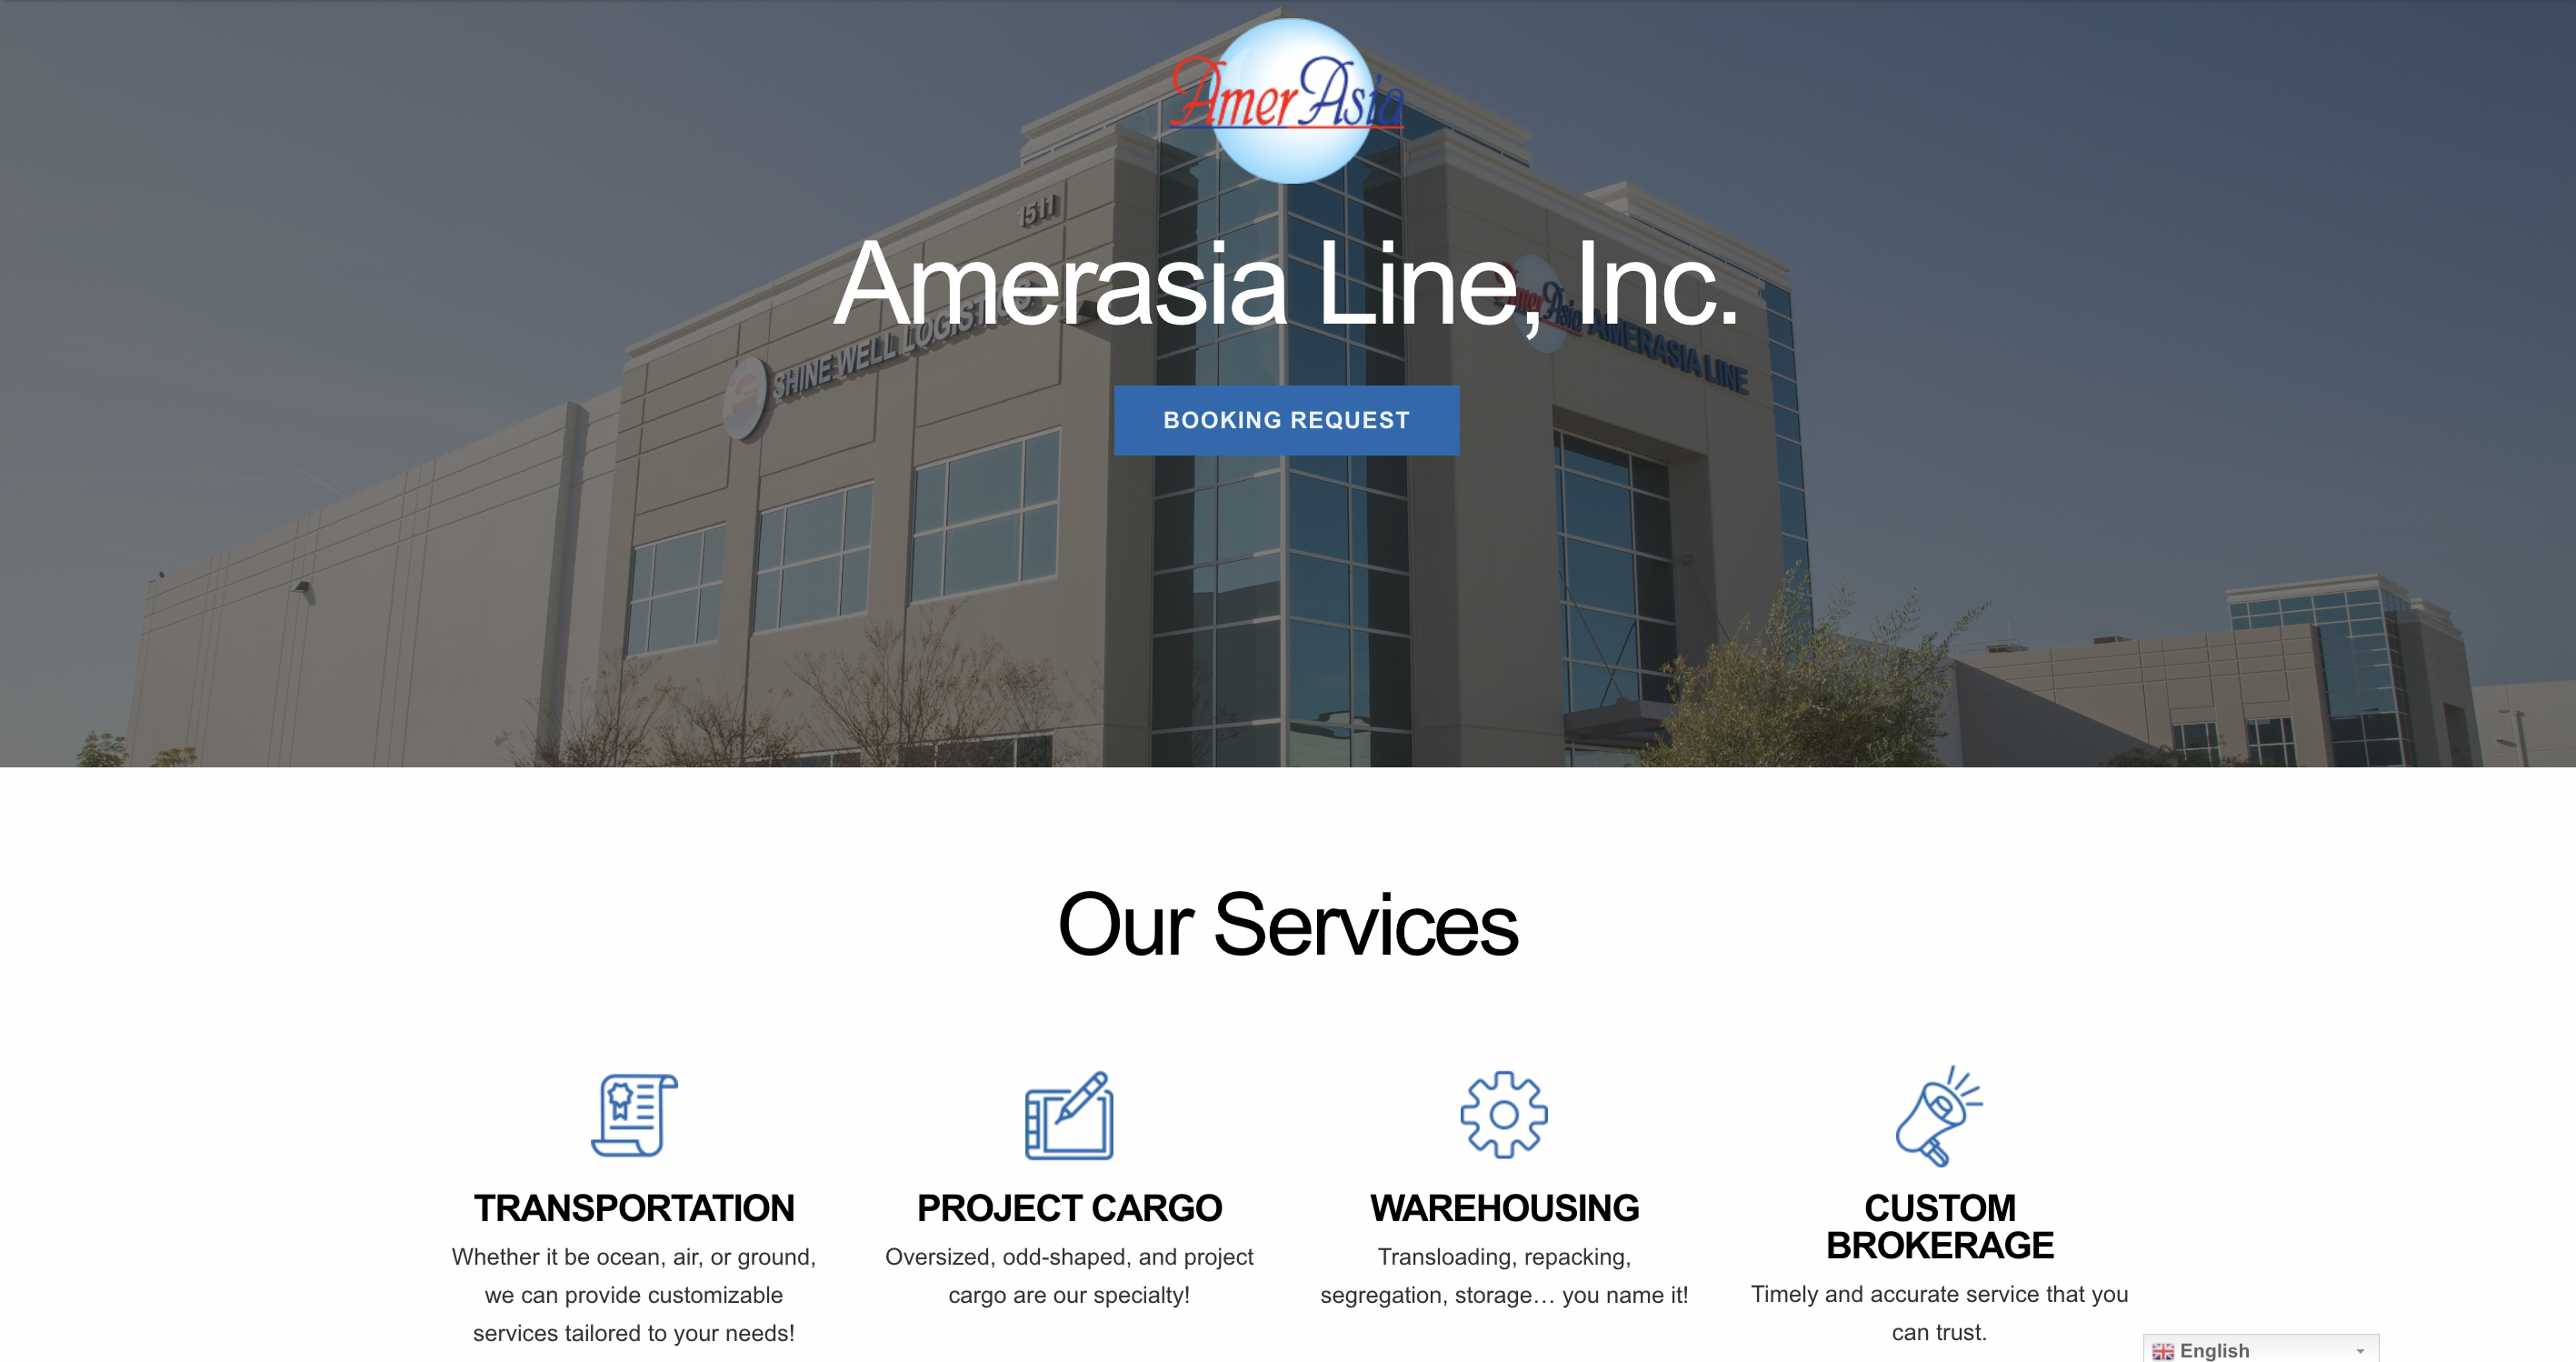 Amerasia is an internation freight and shipping company based out of Shanghai. 